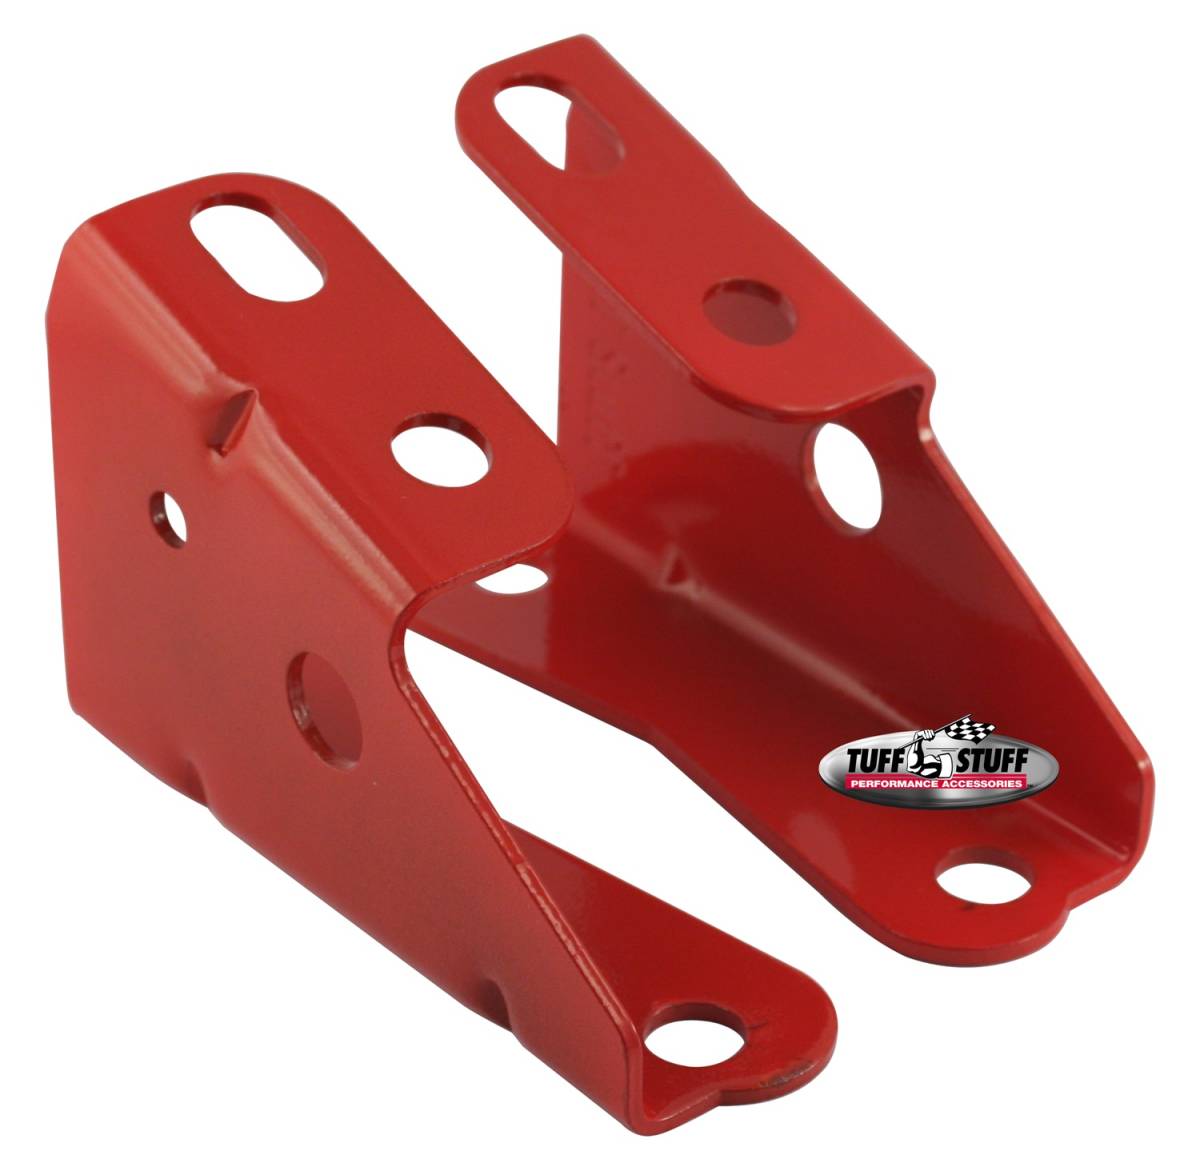 Tuff Stuff Performance - Brake Booster Brackets Incl. Left And Right Side 1967-1972 GM For Brake Booster PN[2121/2122/2123/2124/2129/2221/2222/2223/2224/2228/2229/2231] Red Powdercoat 4650BRED